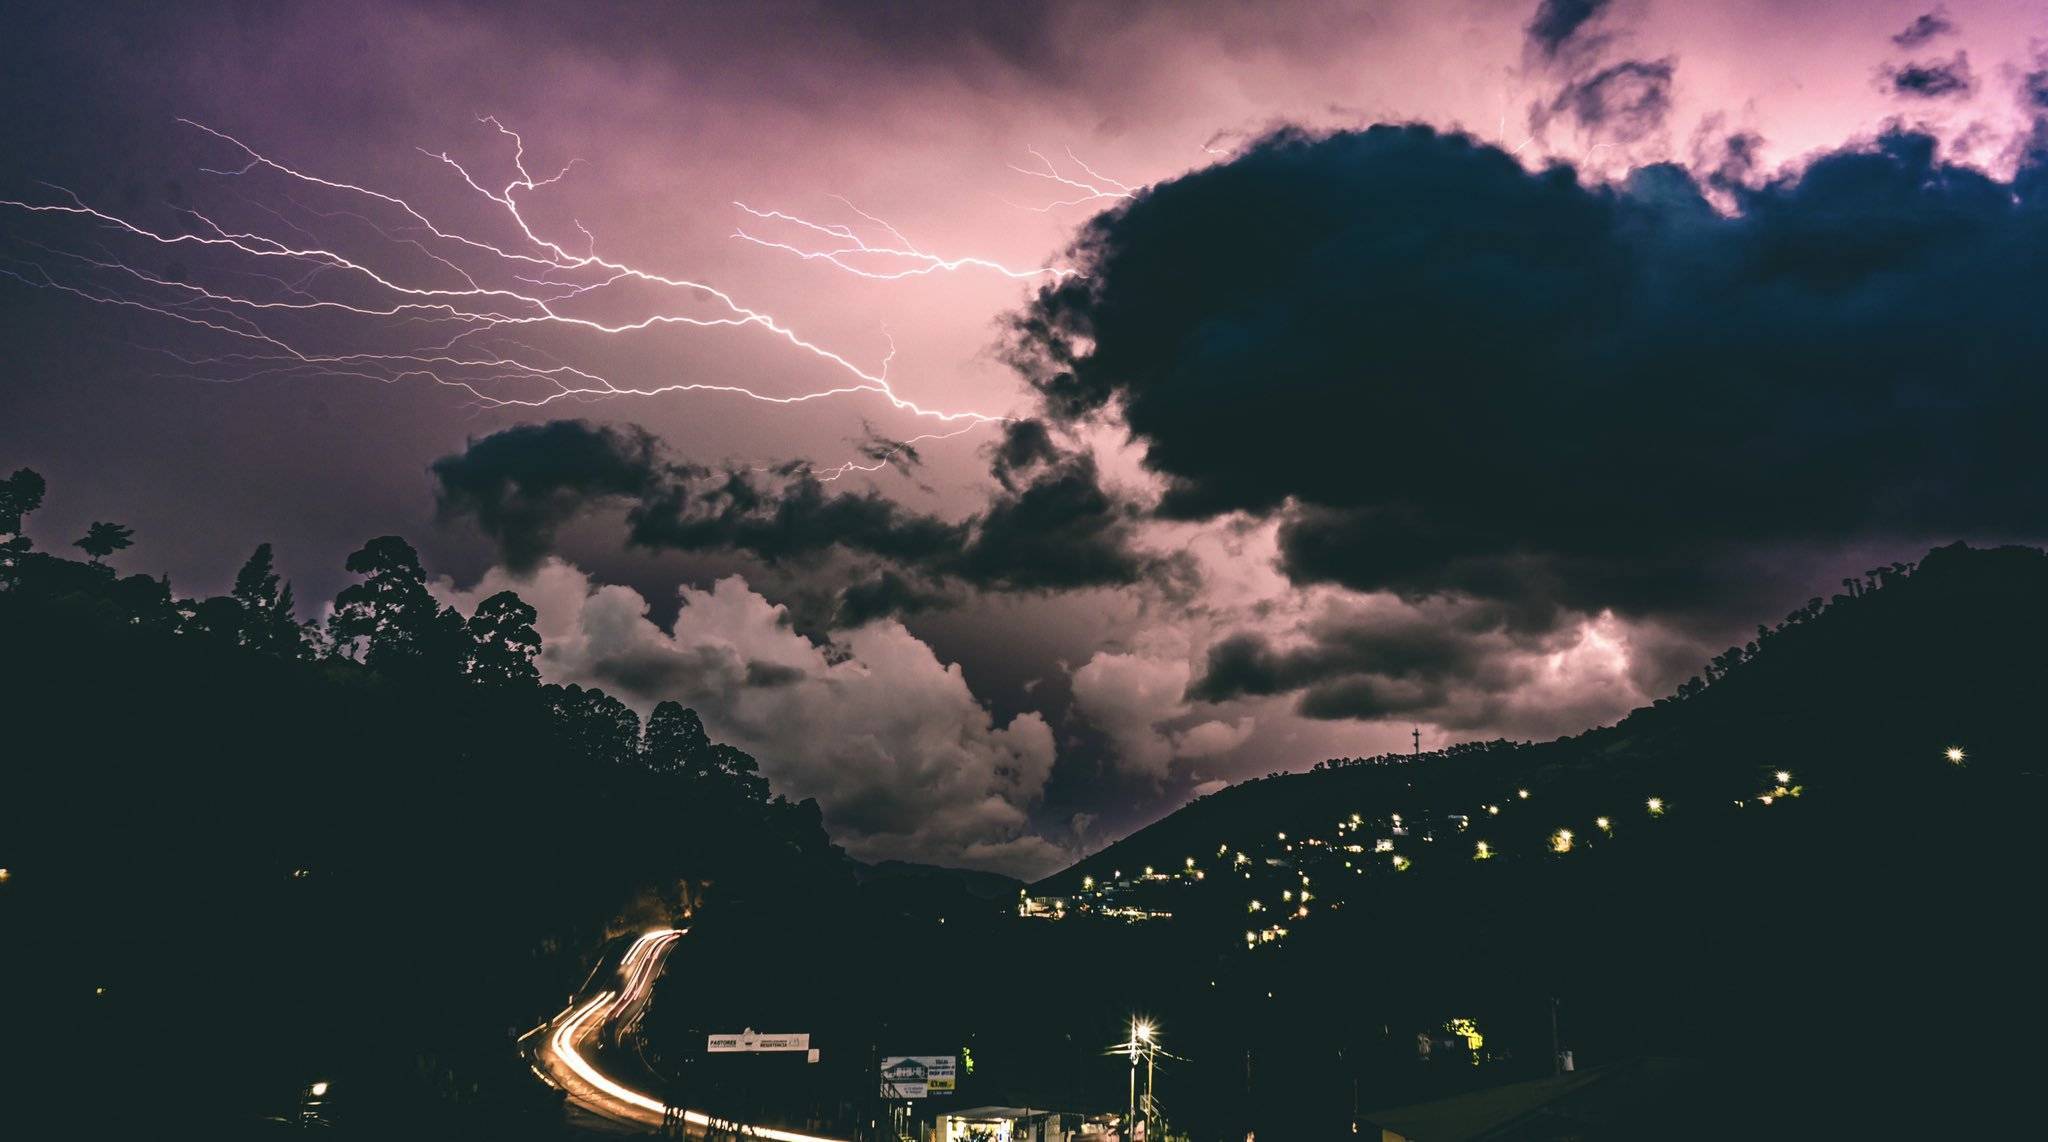 Storms are very real in Guatemala by Stephen Mason @wheremercyfalls